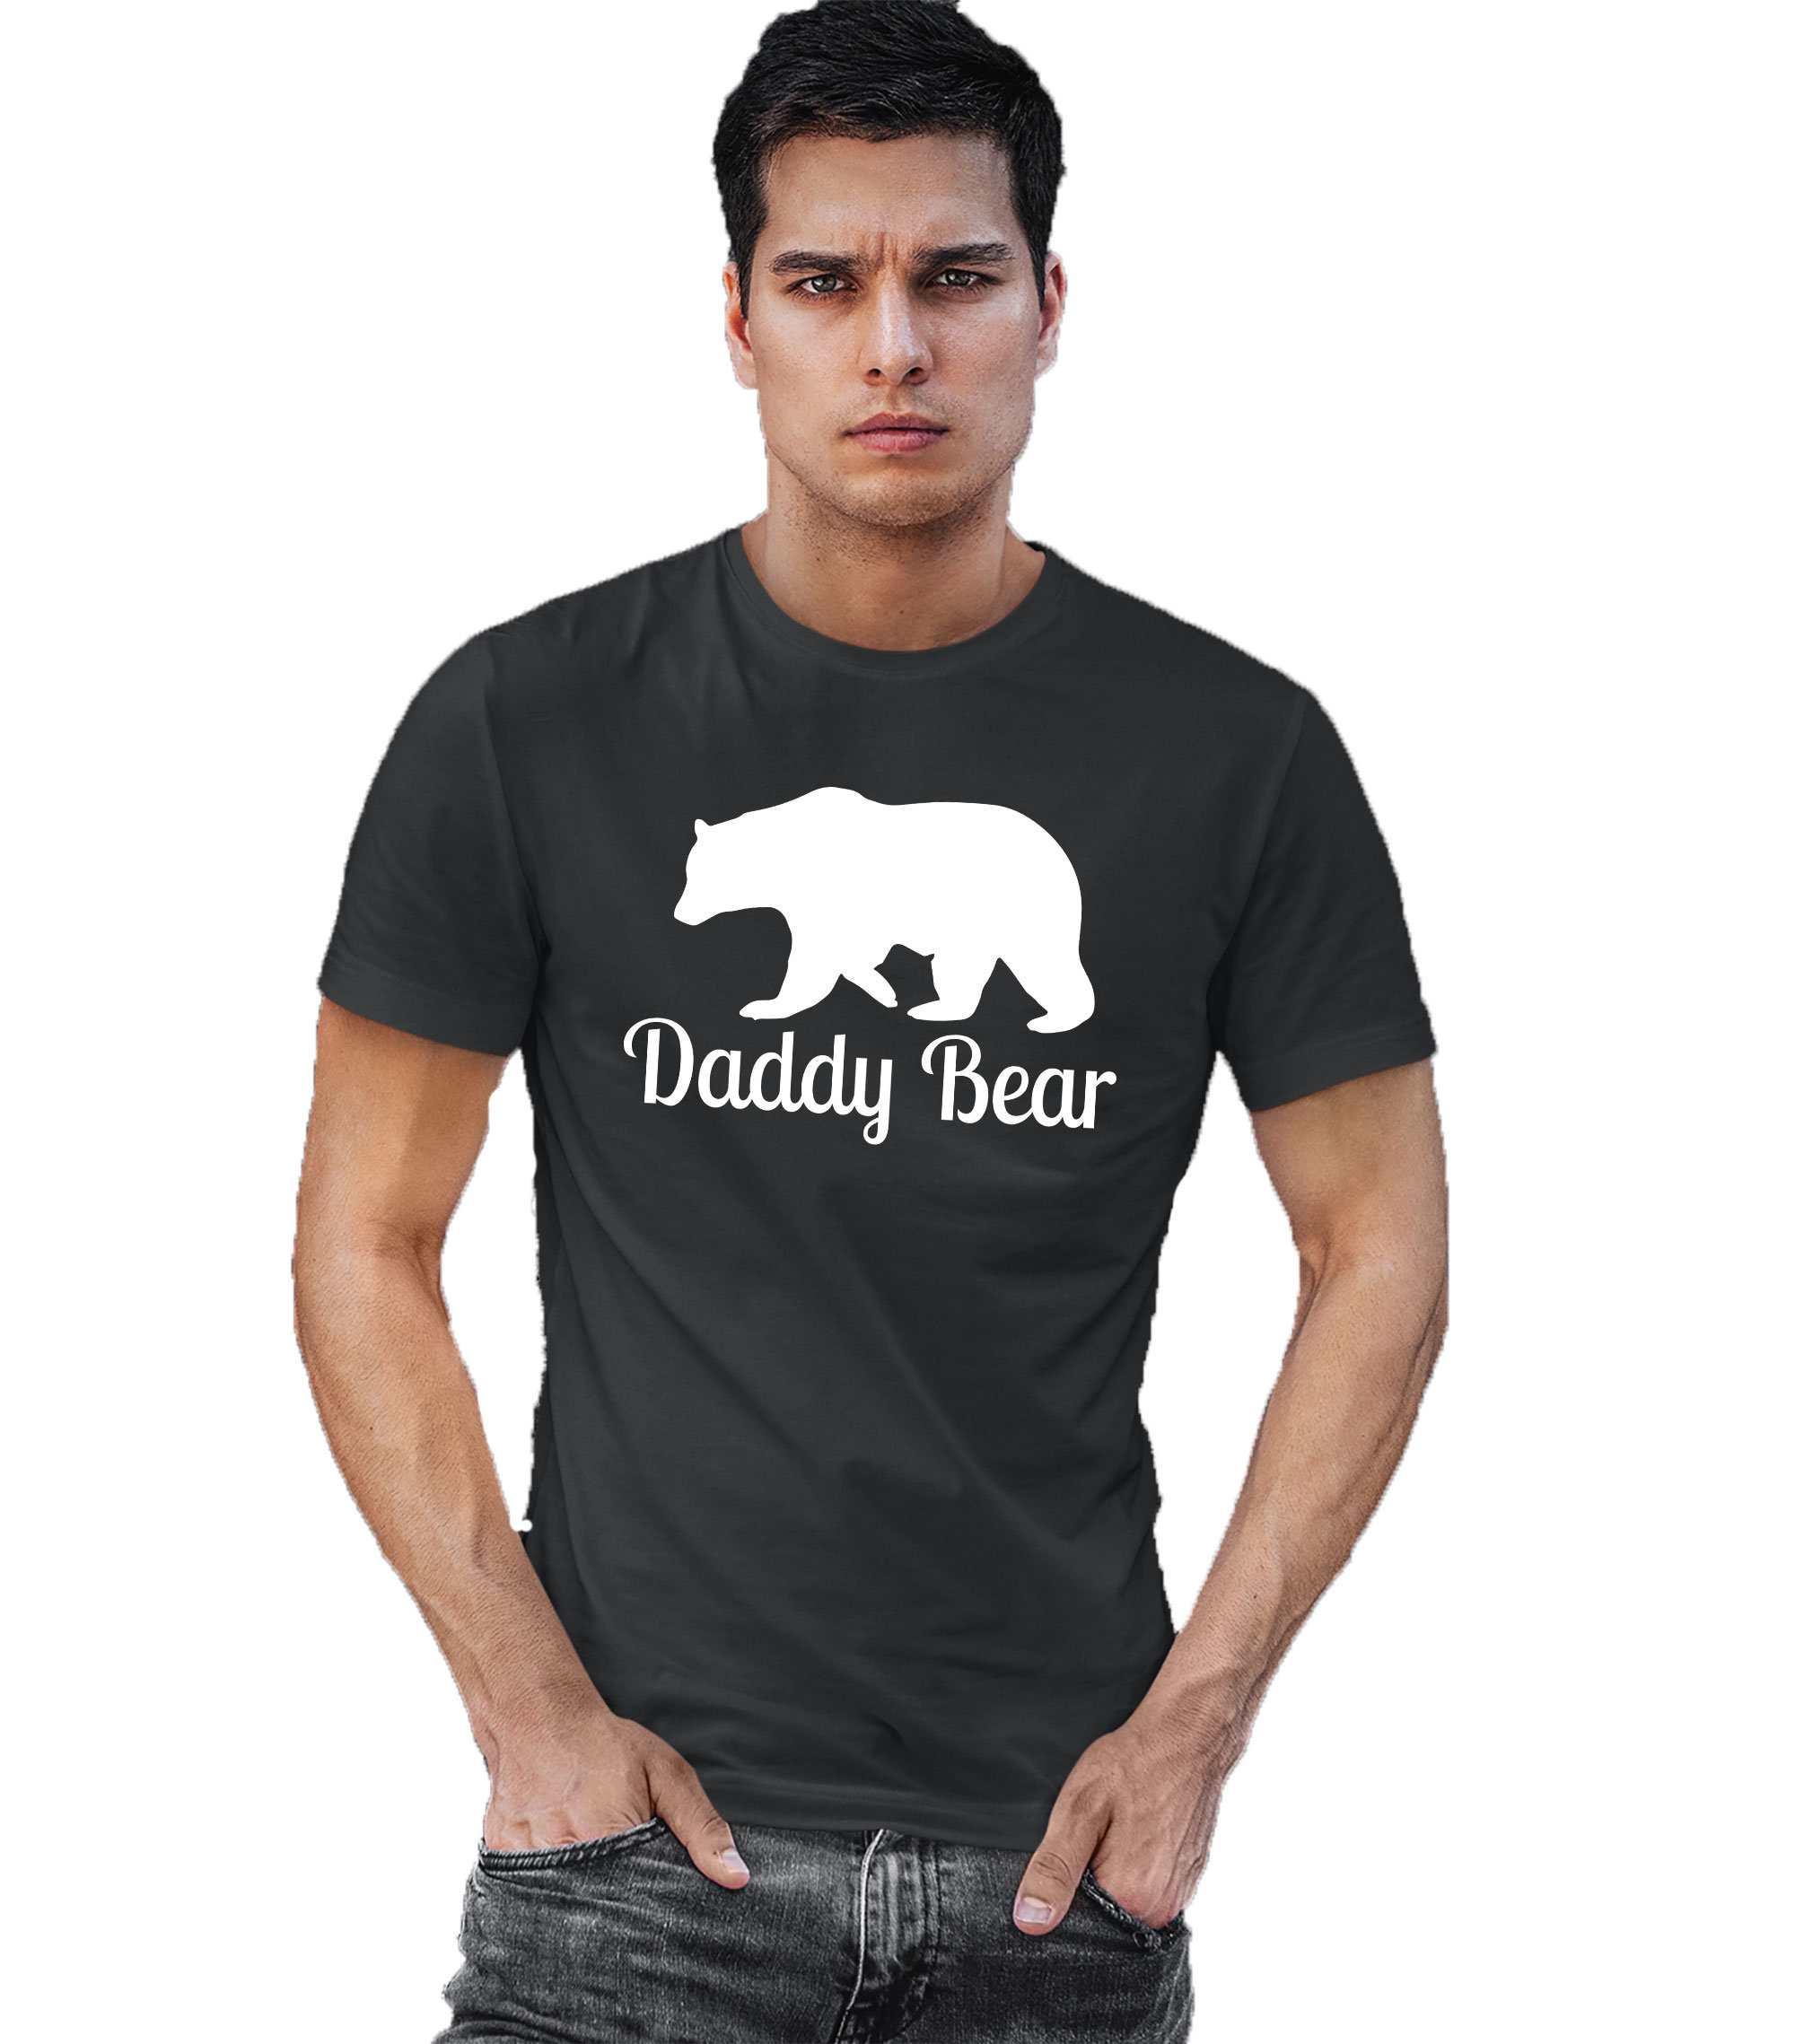 New Daddy Bear Black Tee White Print Father Gift Black | Etsy